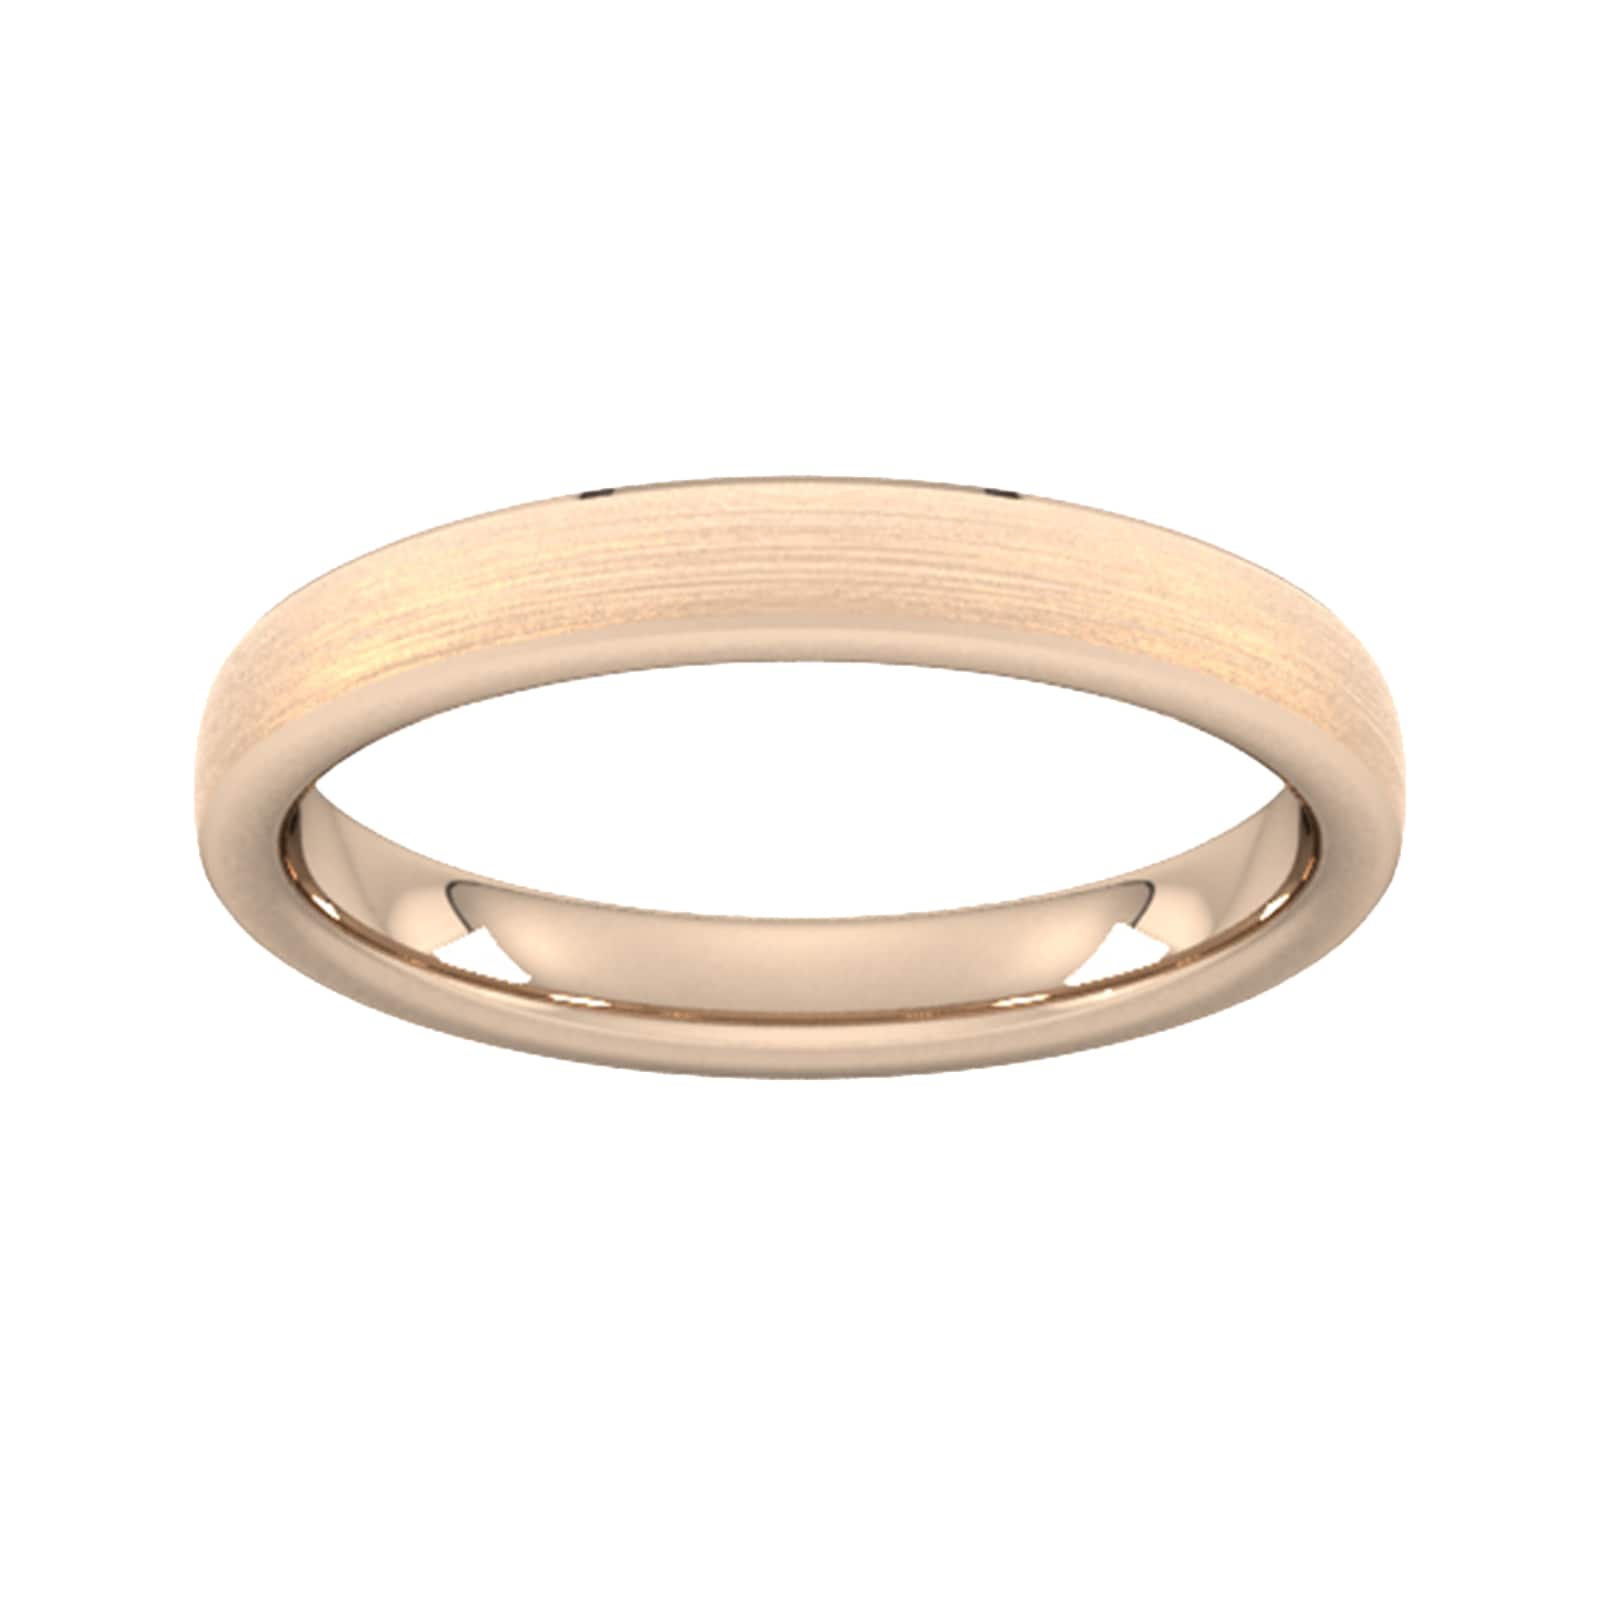 3mm Flat Court Heavy Polished Chamfered Edges With Matt Centre Wedding Ring In 18 Carat Rose Gold - Ring Size K